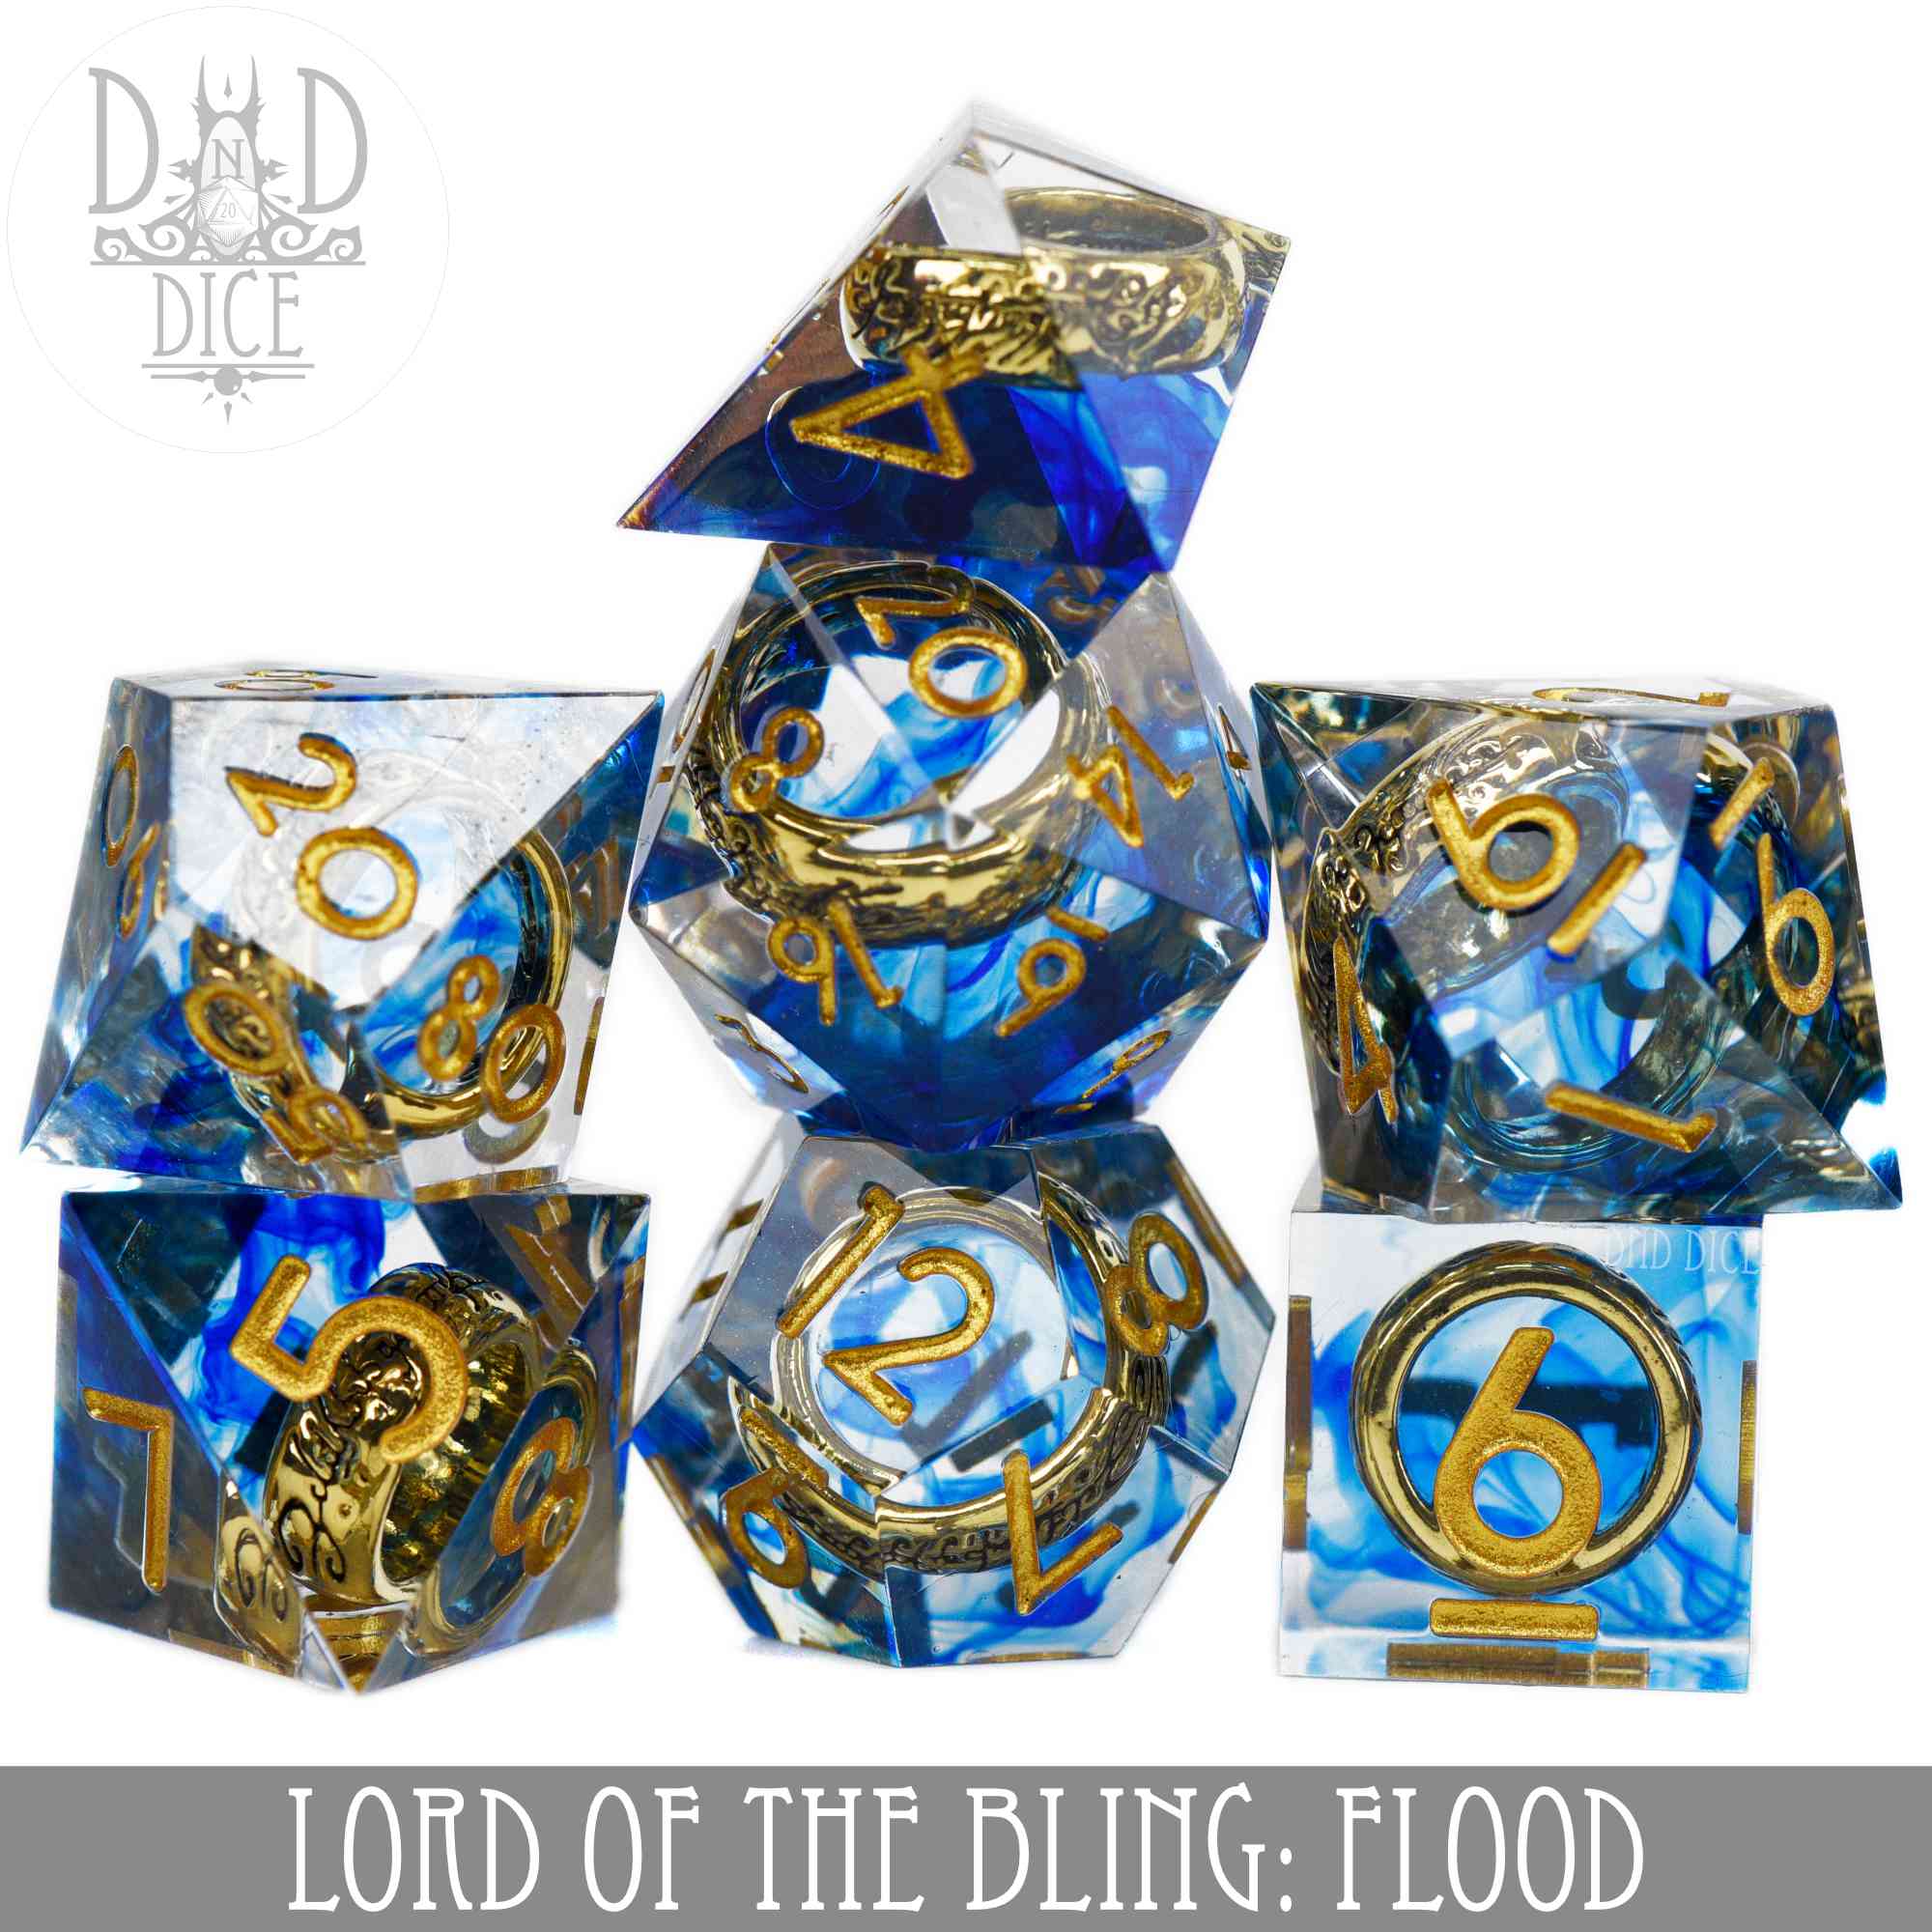 Lord of the Bling: Flood Handmade Dice Set